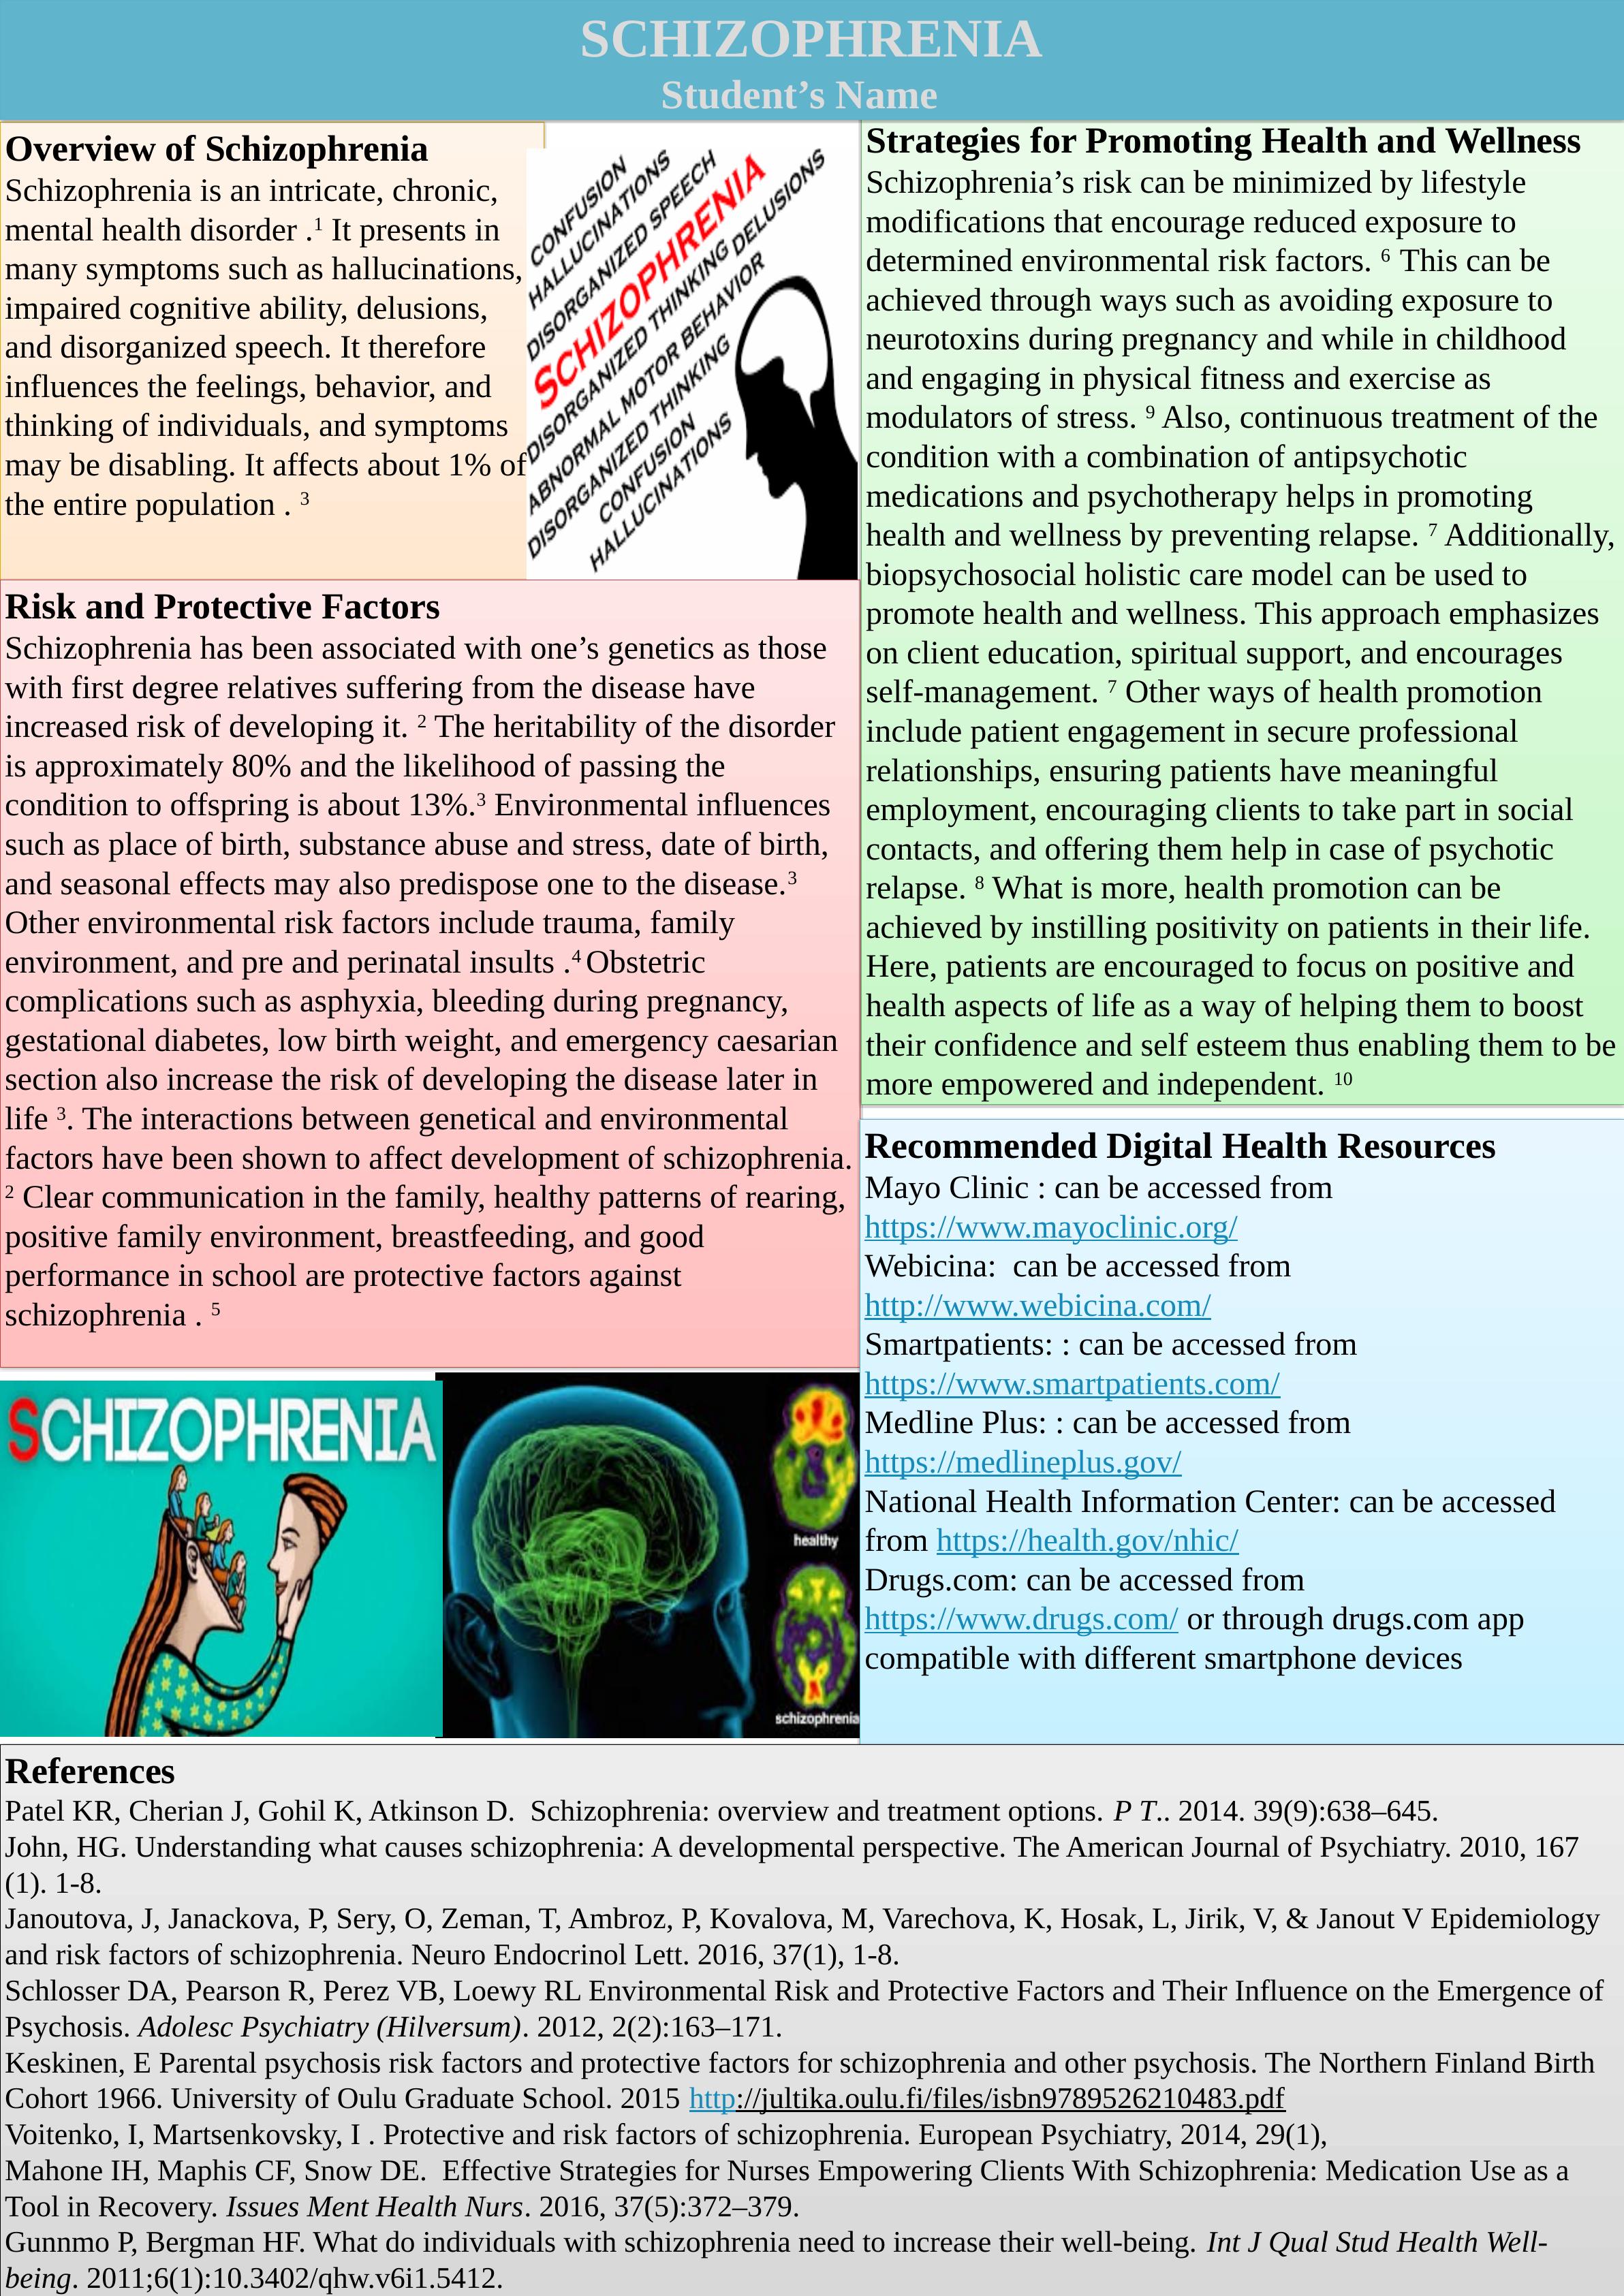 Strategies for Promoting Health and Wellness in Schizophrenia_1